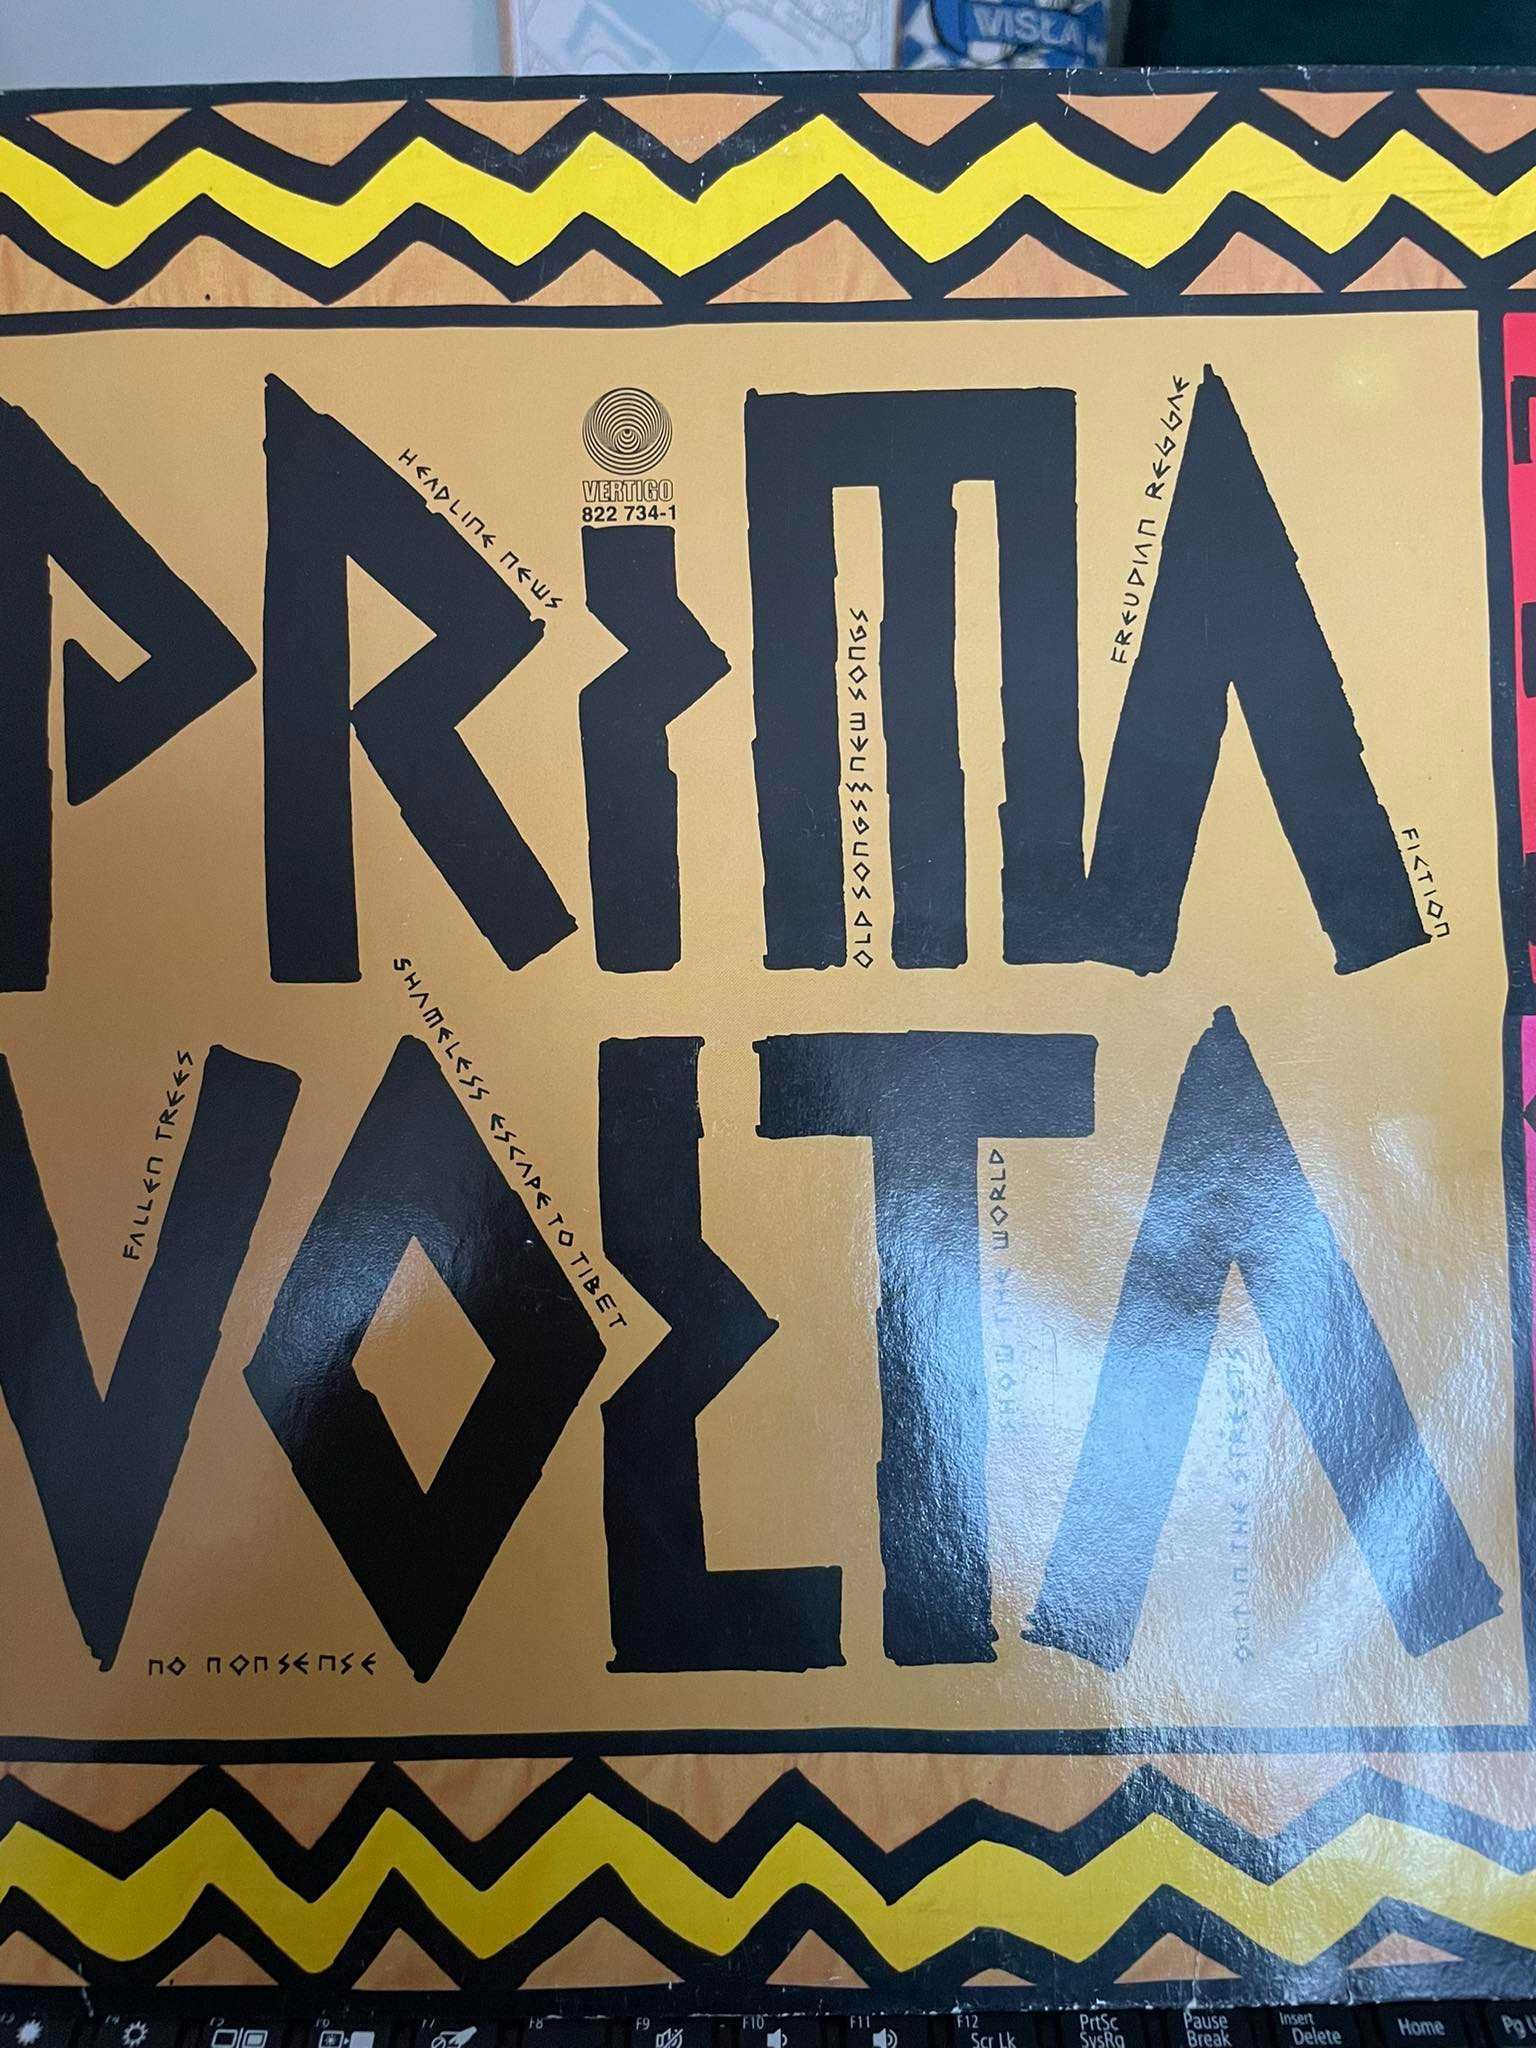 Prima Volta ‎– MMWOPS (Making Music While Other People Sleep)